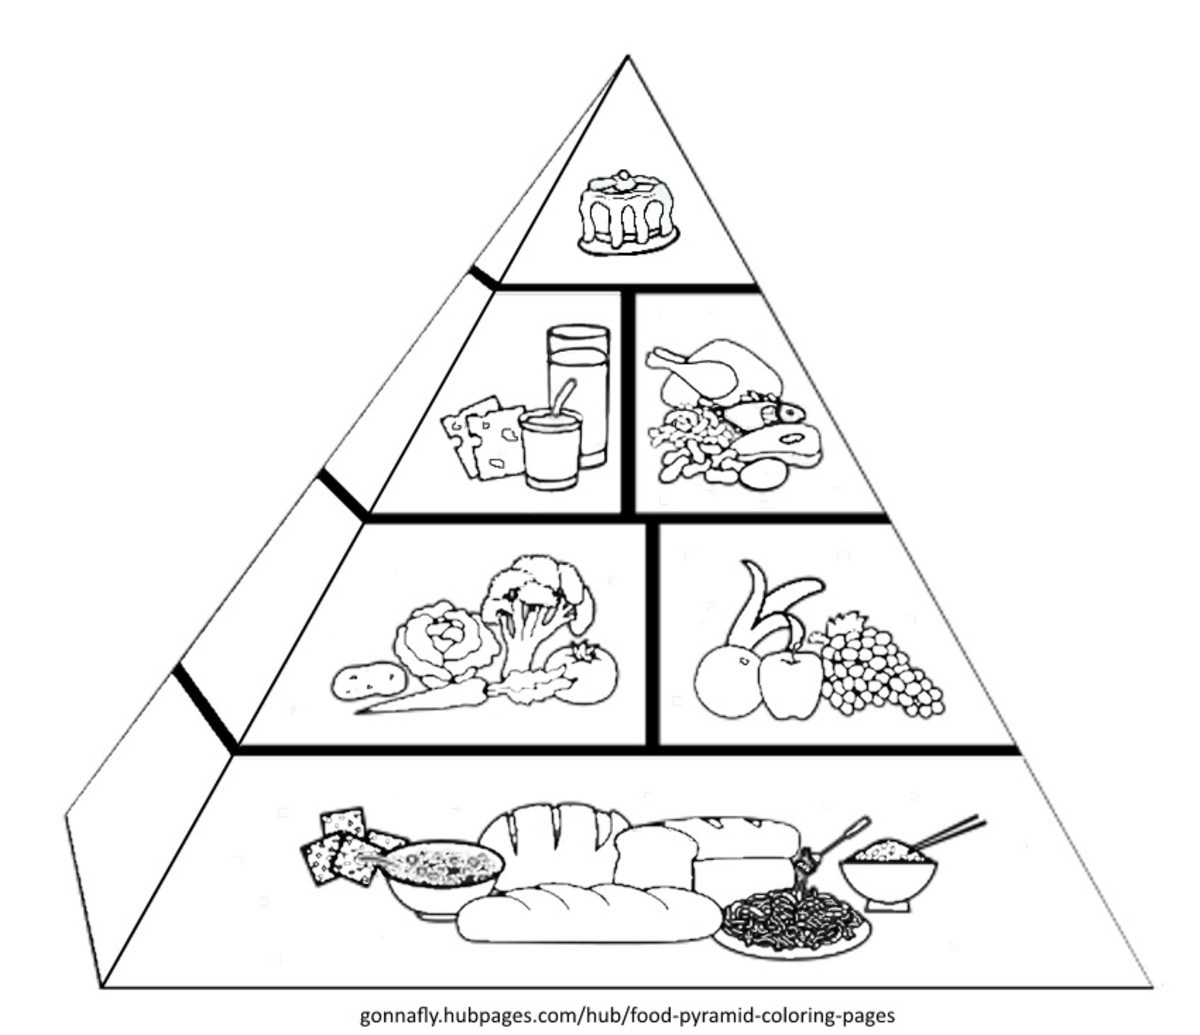 Simple Food Pyramid Coloring Page for Kids